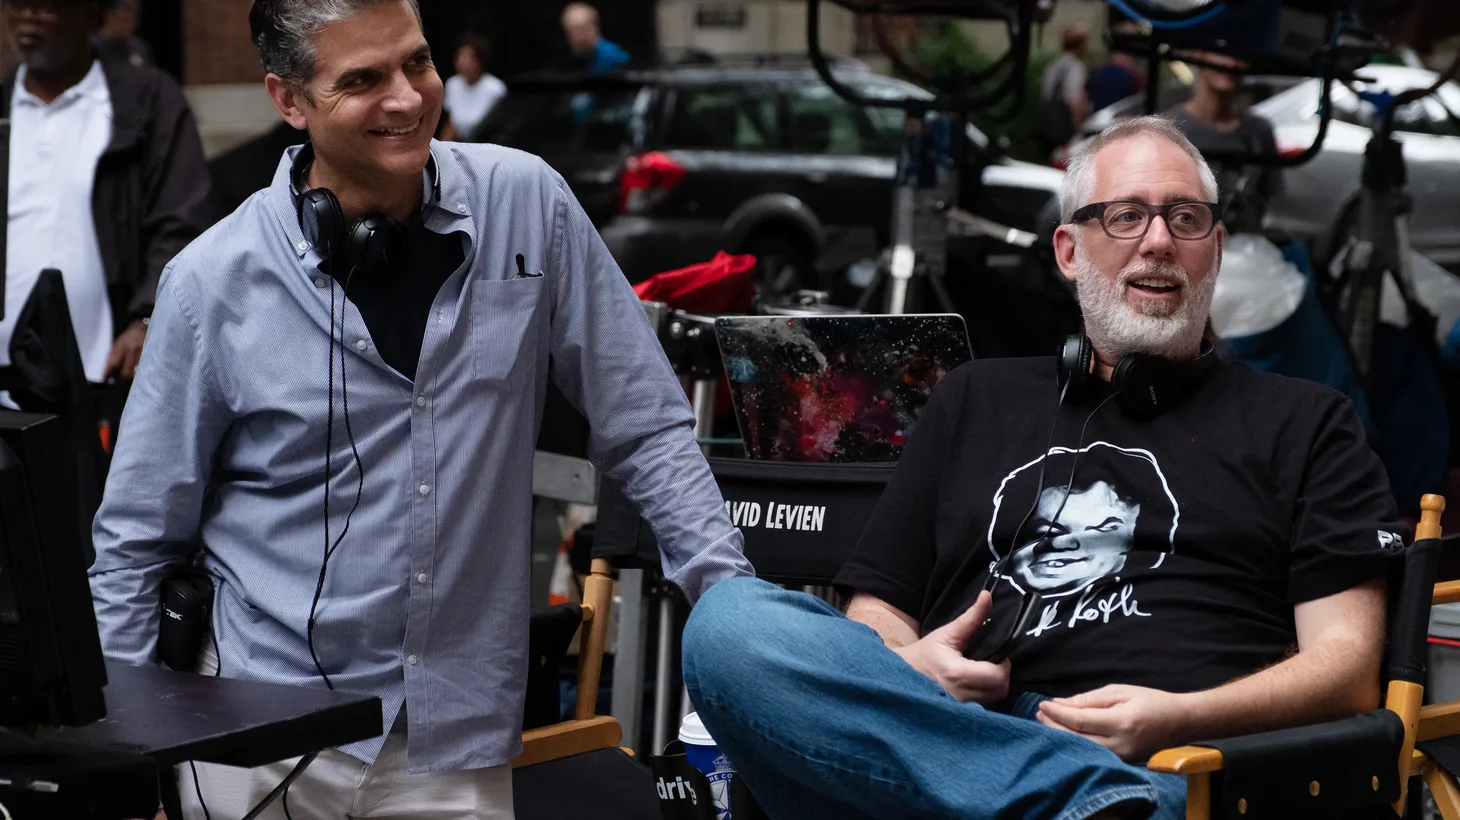 Behind-the-scenes L-R: Executive Producer and Writer David Levien and Executive Producer and Writer Brian Koppelman on the set of Billions season 3.